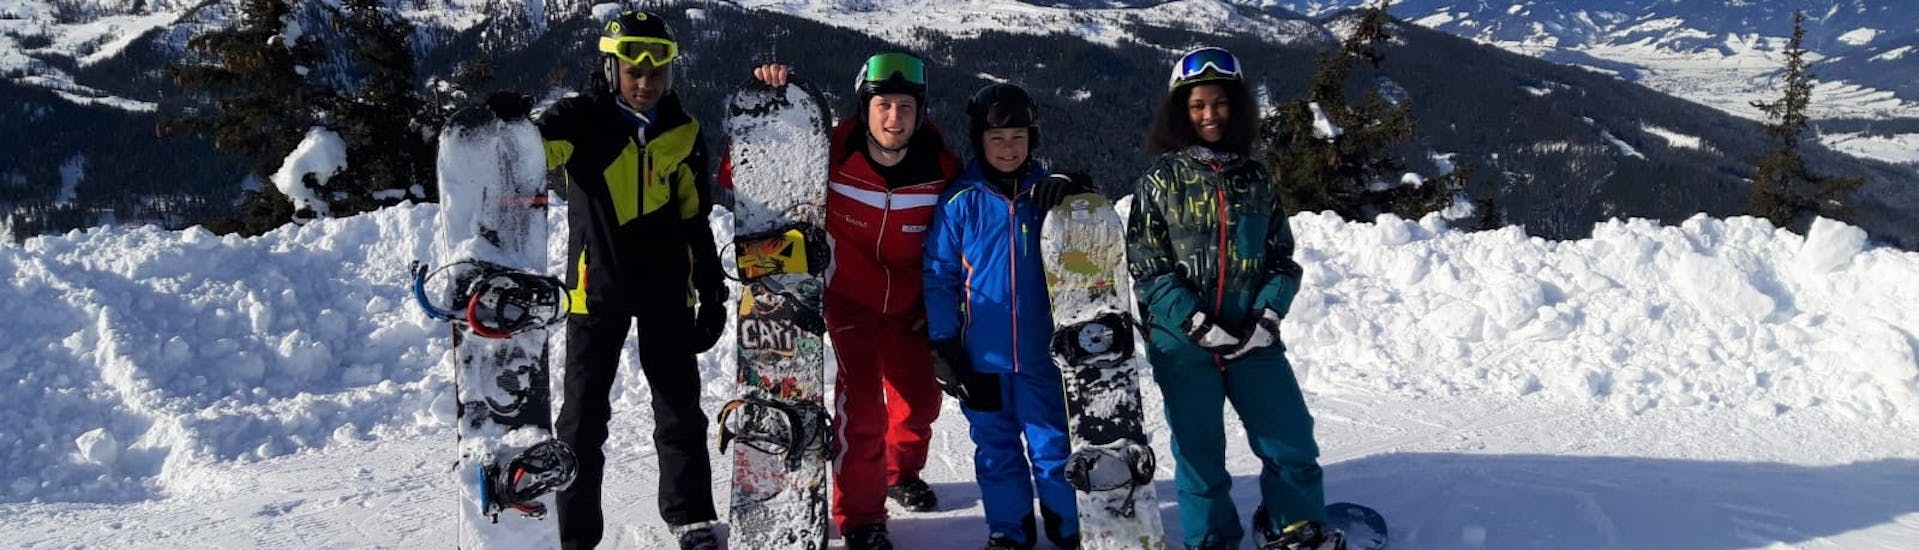 A group of snowboarders with their instructor during their private snowboarding lessons for kids and adults of all levels with the Reiteralm Ski School in Schladming.